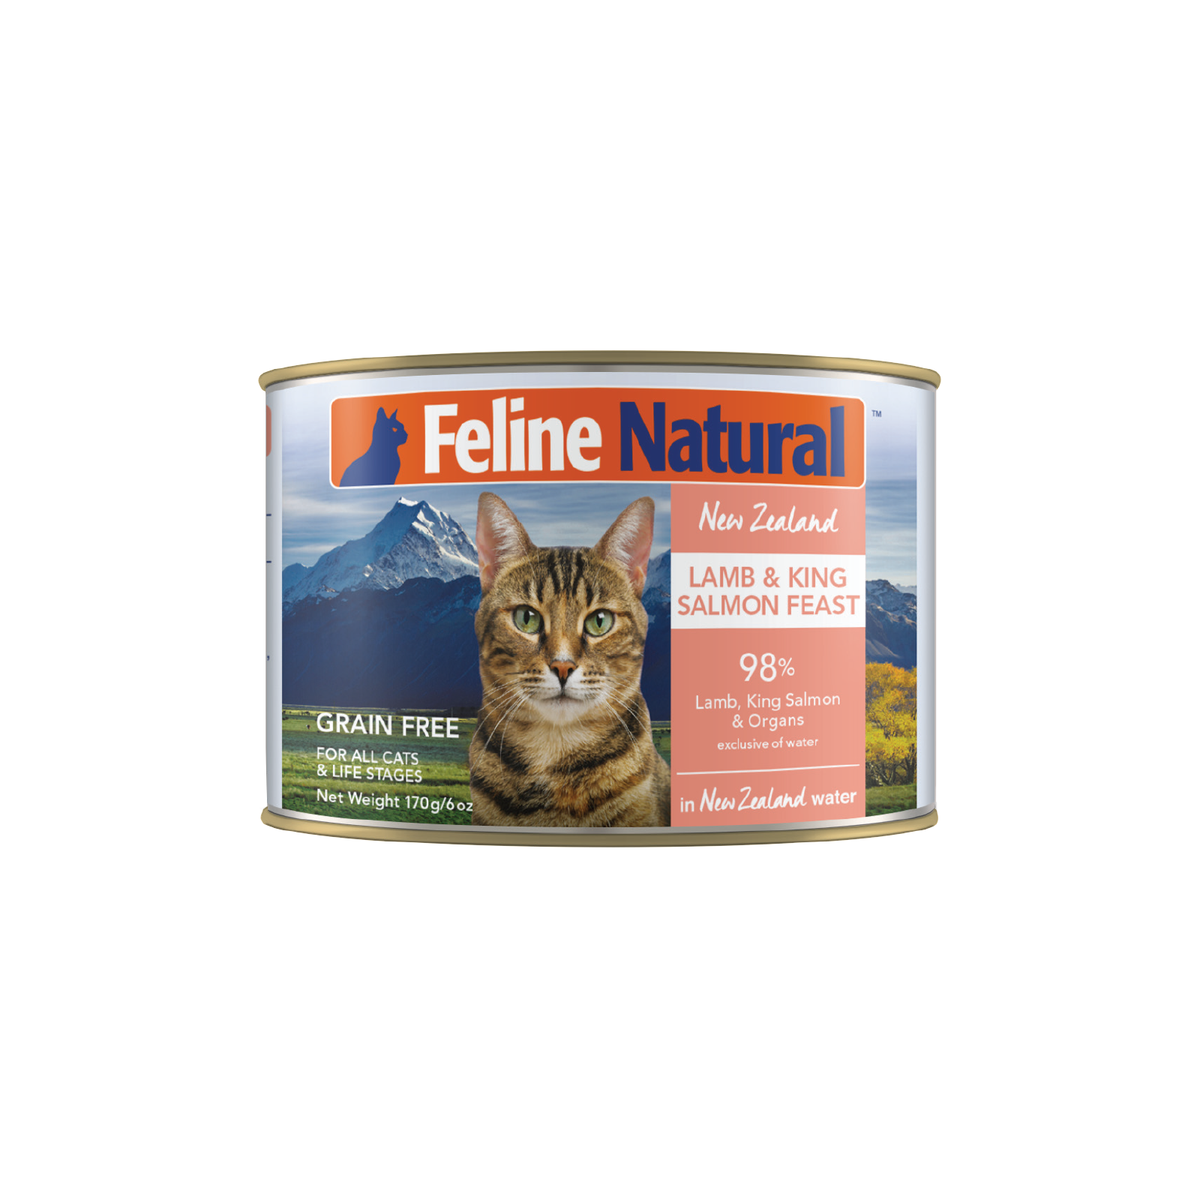 Feline Natural Lamb and Salmon Feast Can Tray 12 x 170g